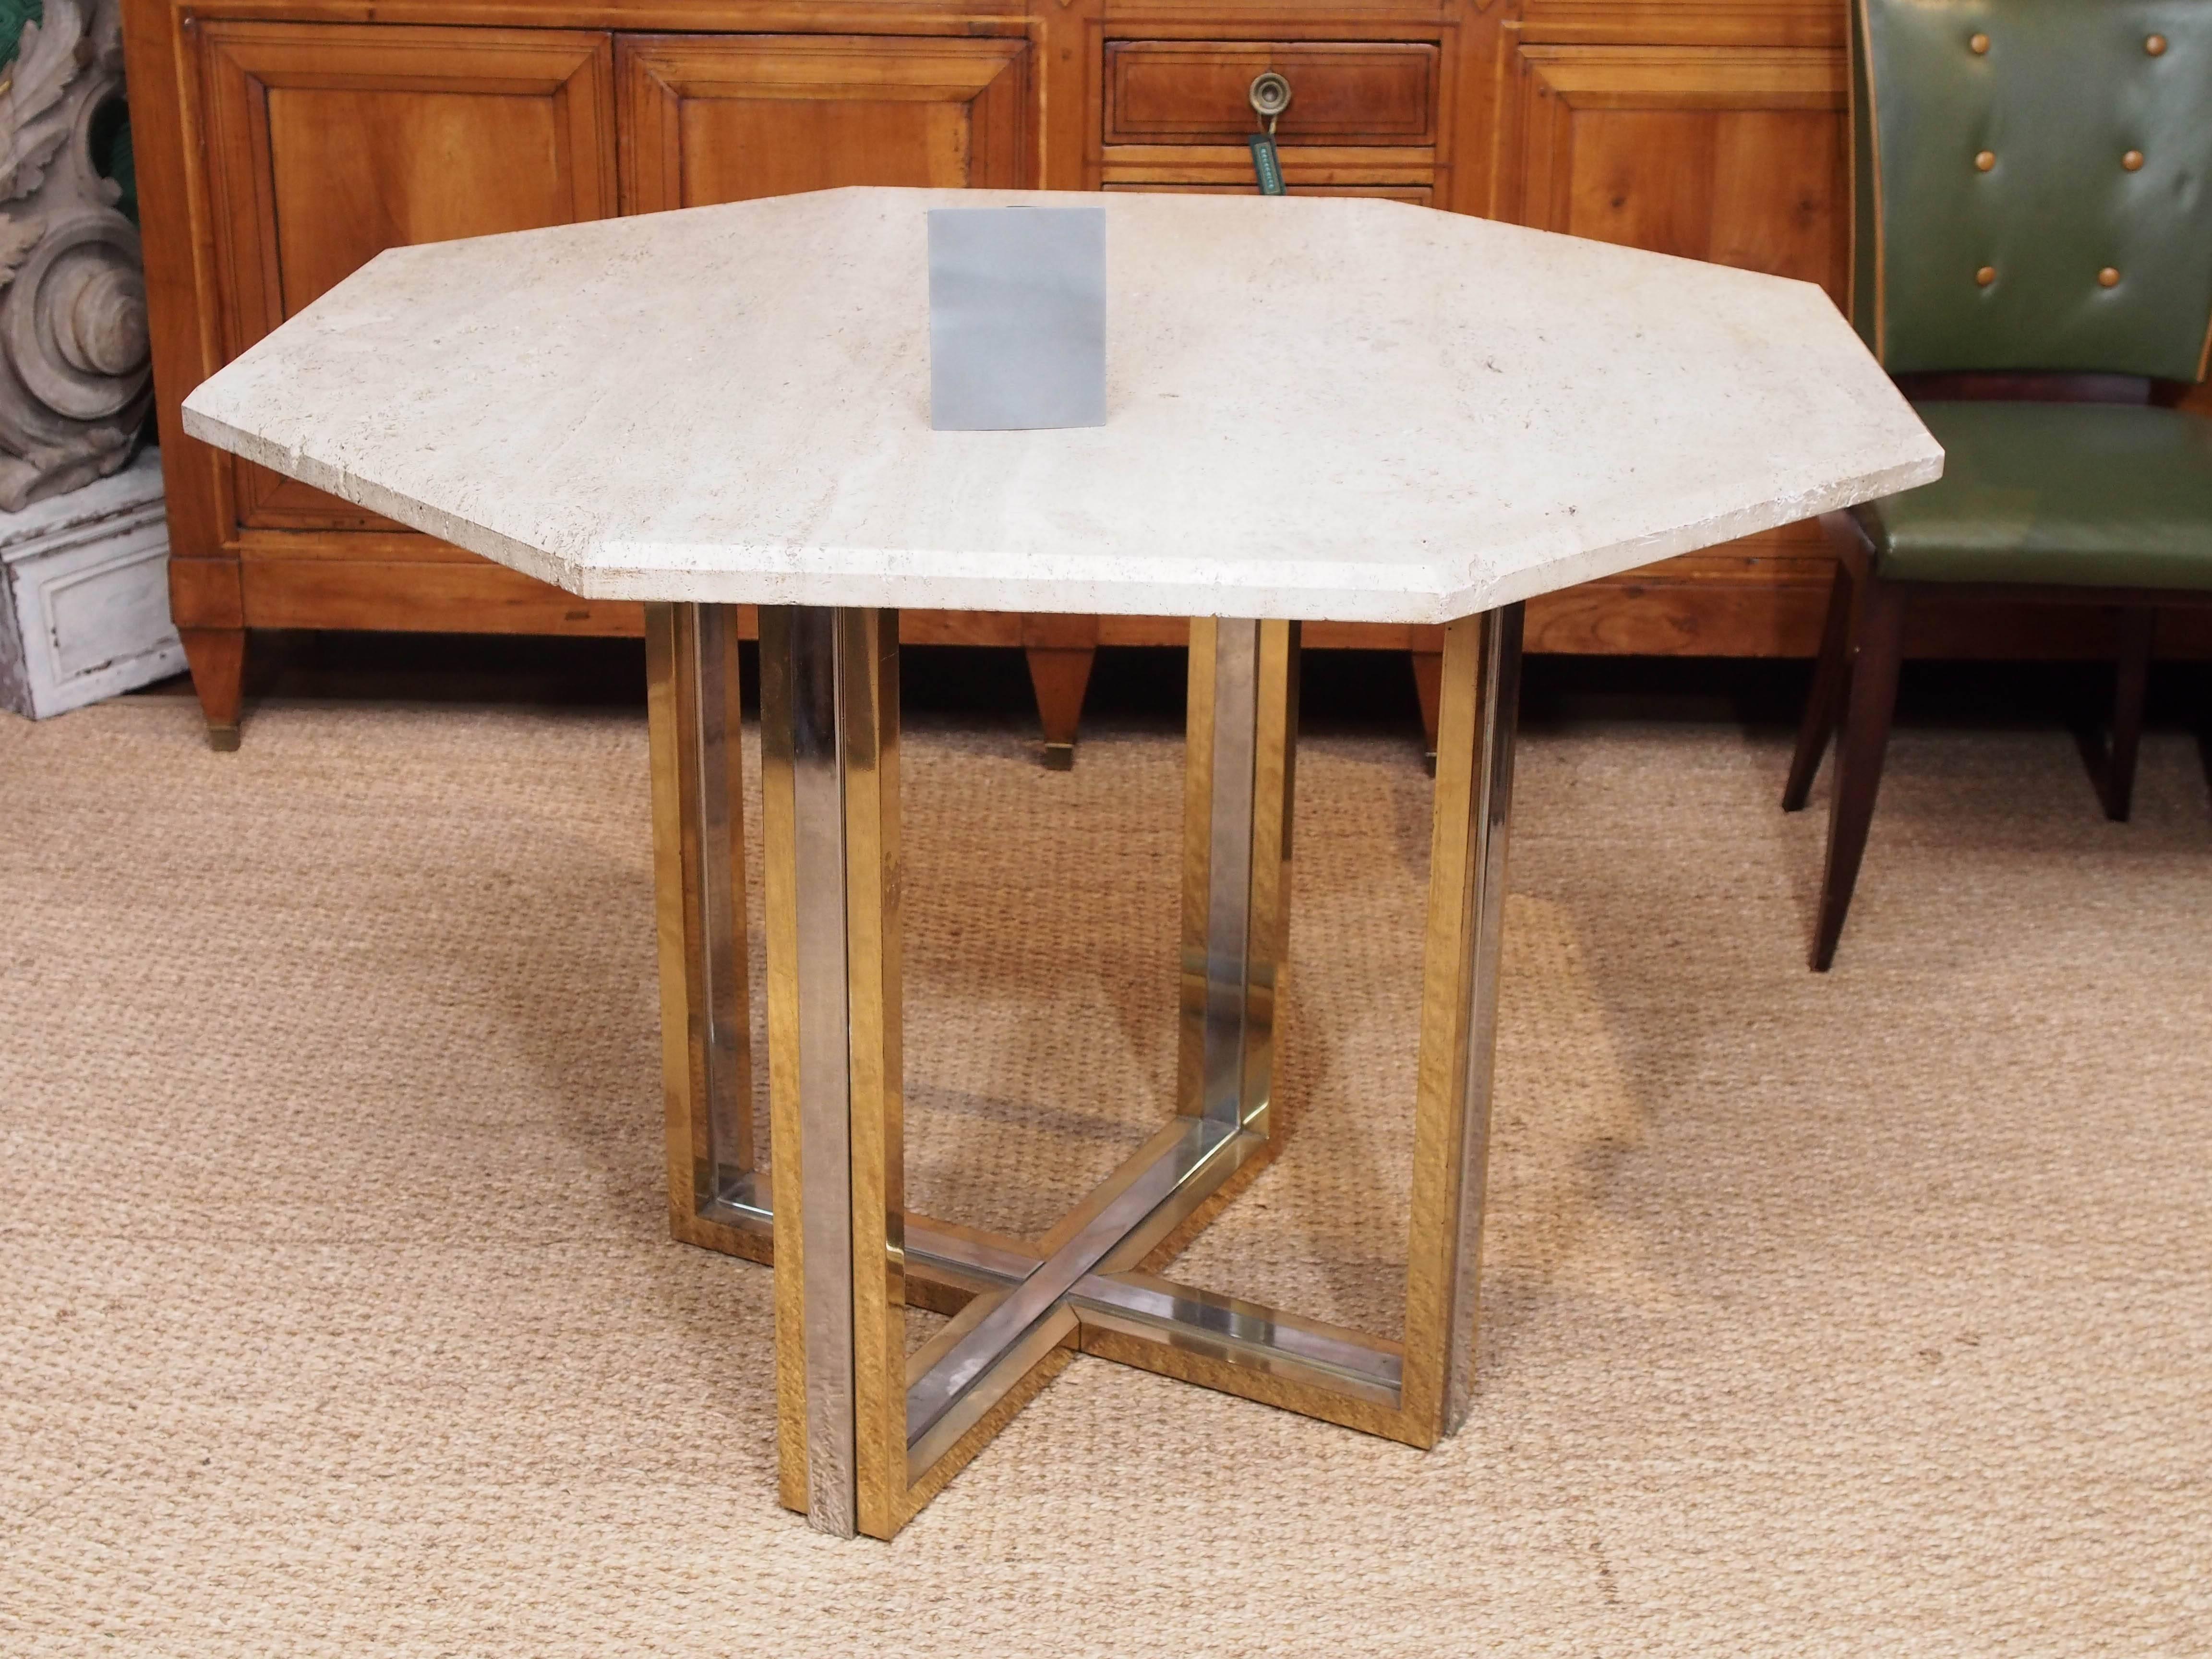 A modern but extremely versatile travertine tabletop with a brass and chrome base from Italian designer Willy Rizzo.